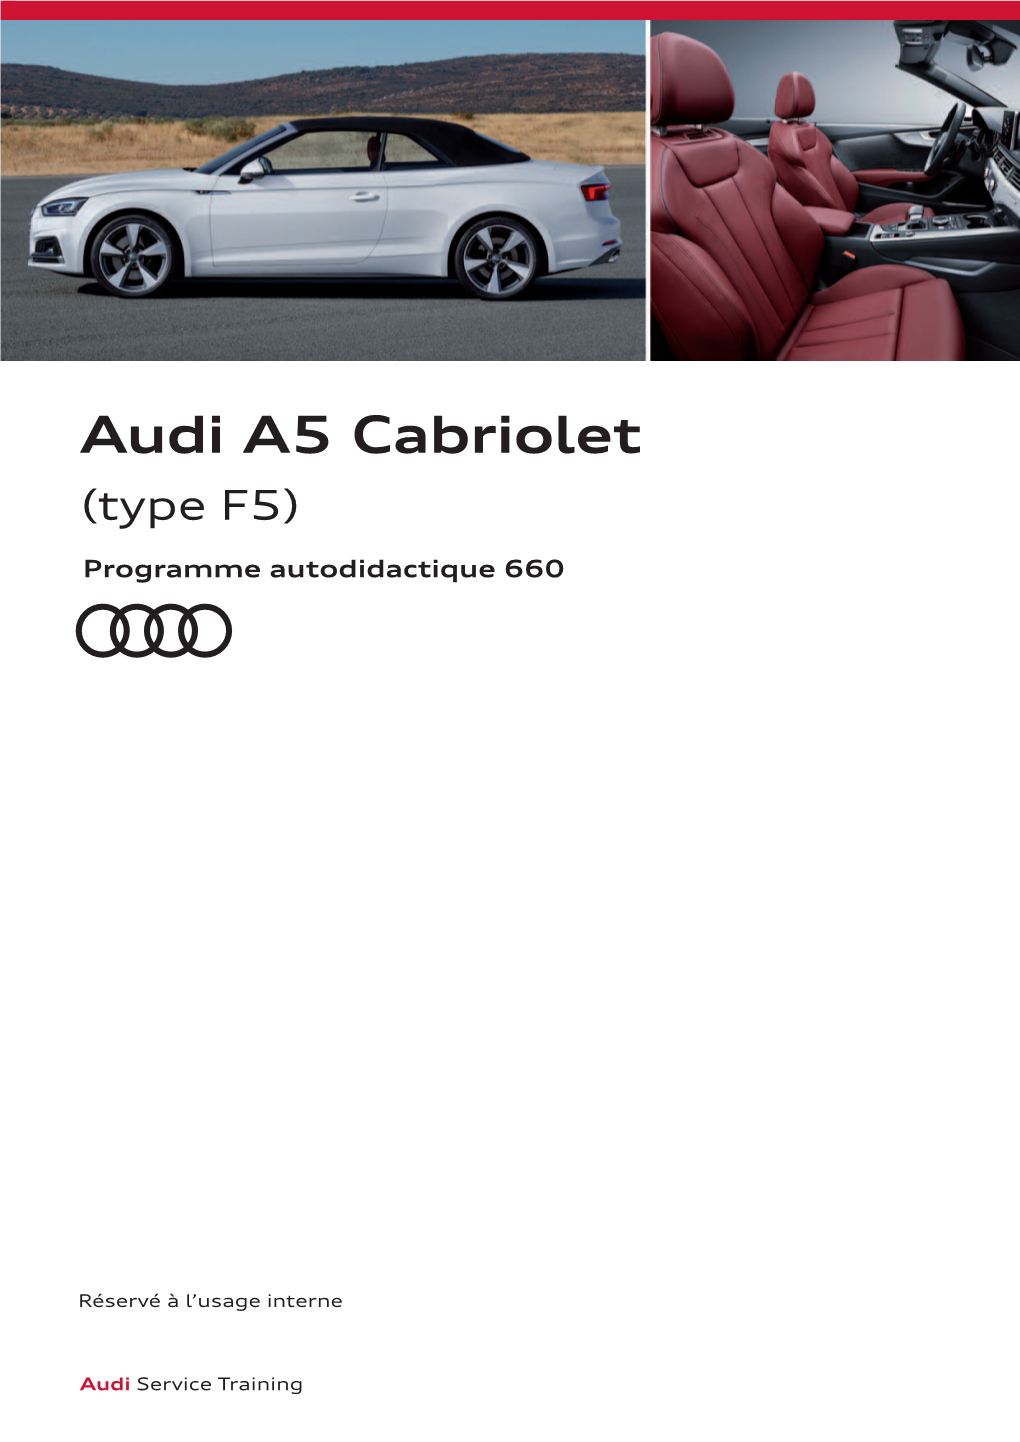 Audi A5 Cabriolet (Type F5)